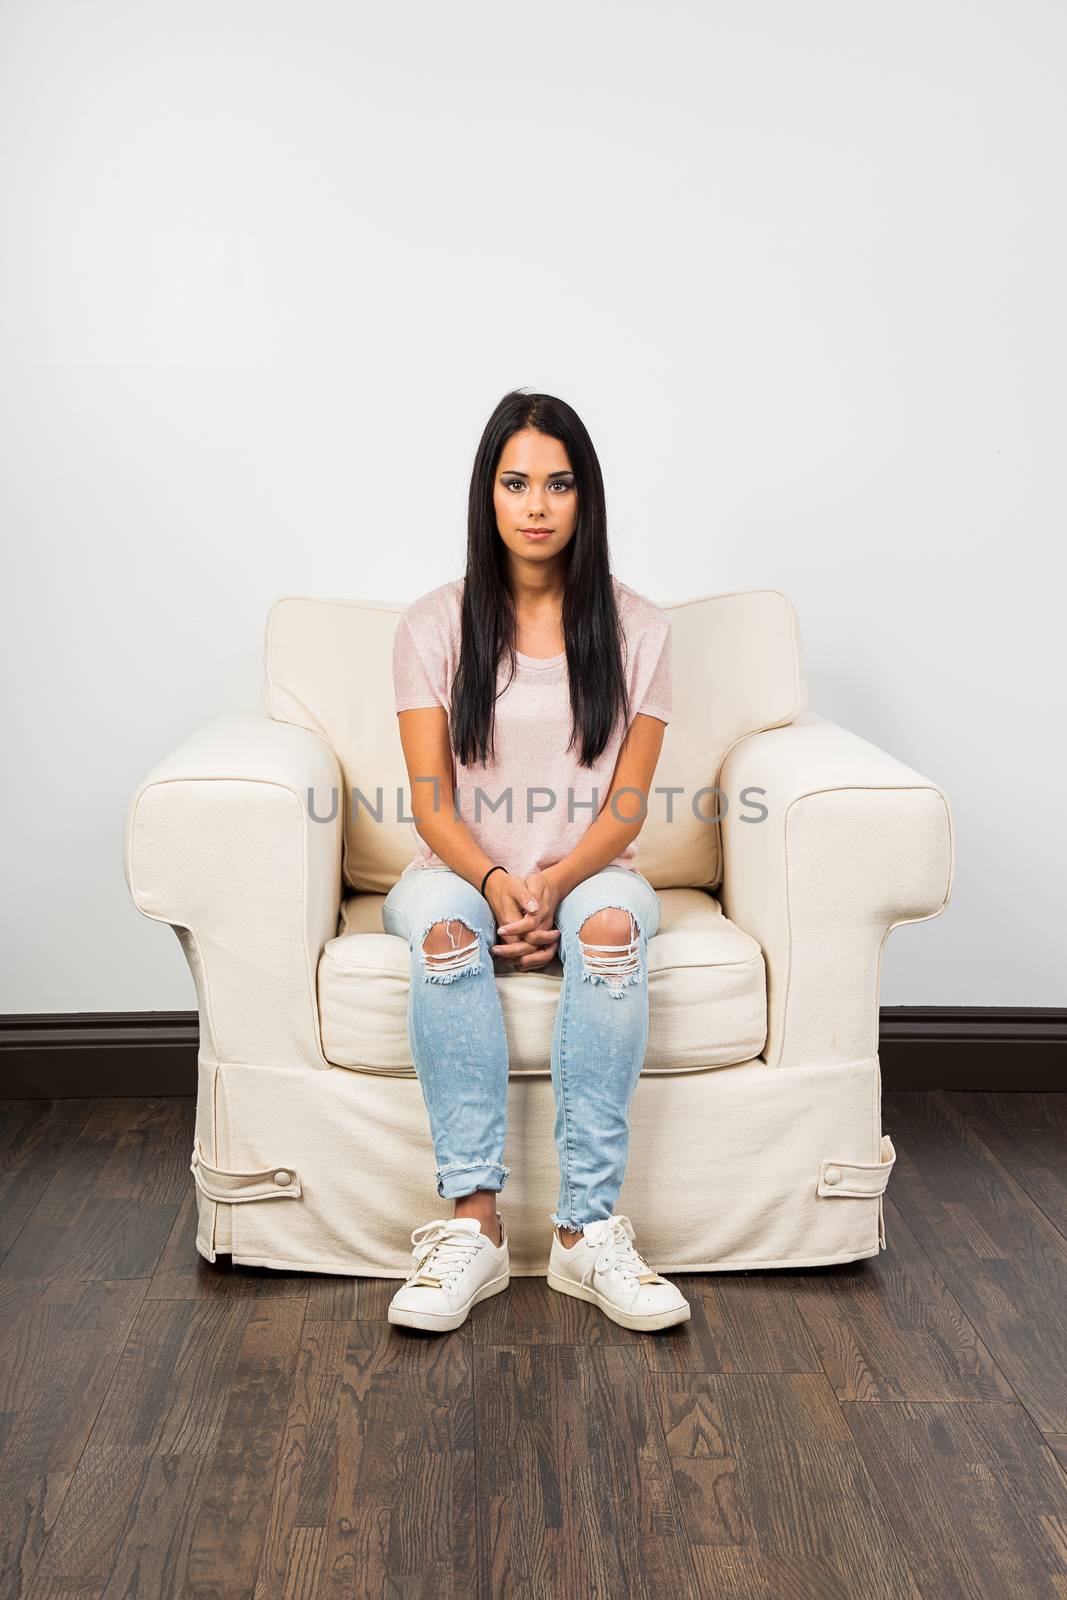 Young woman on a couch by mypstudio